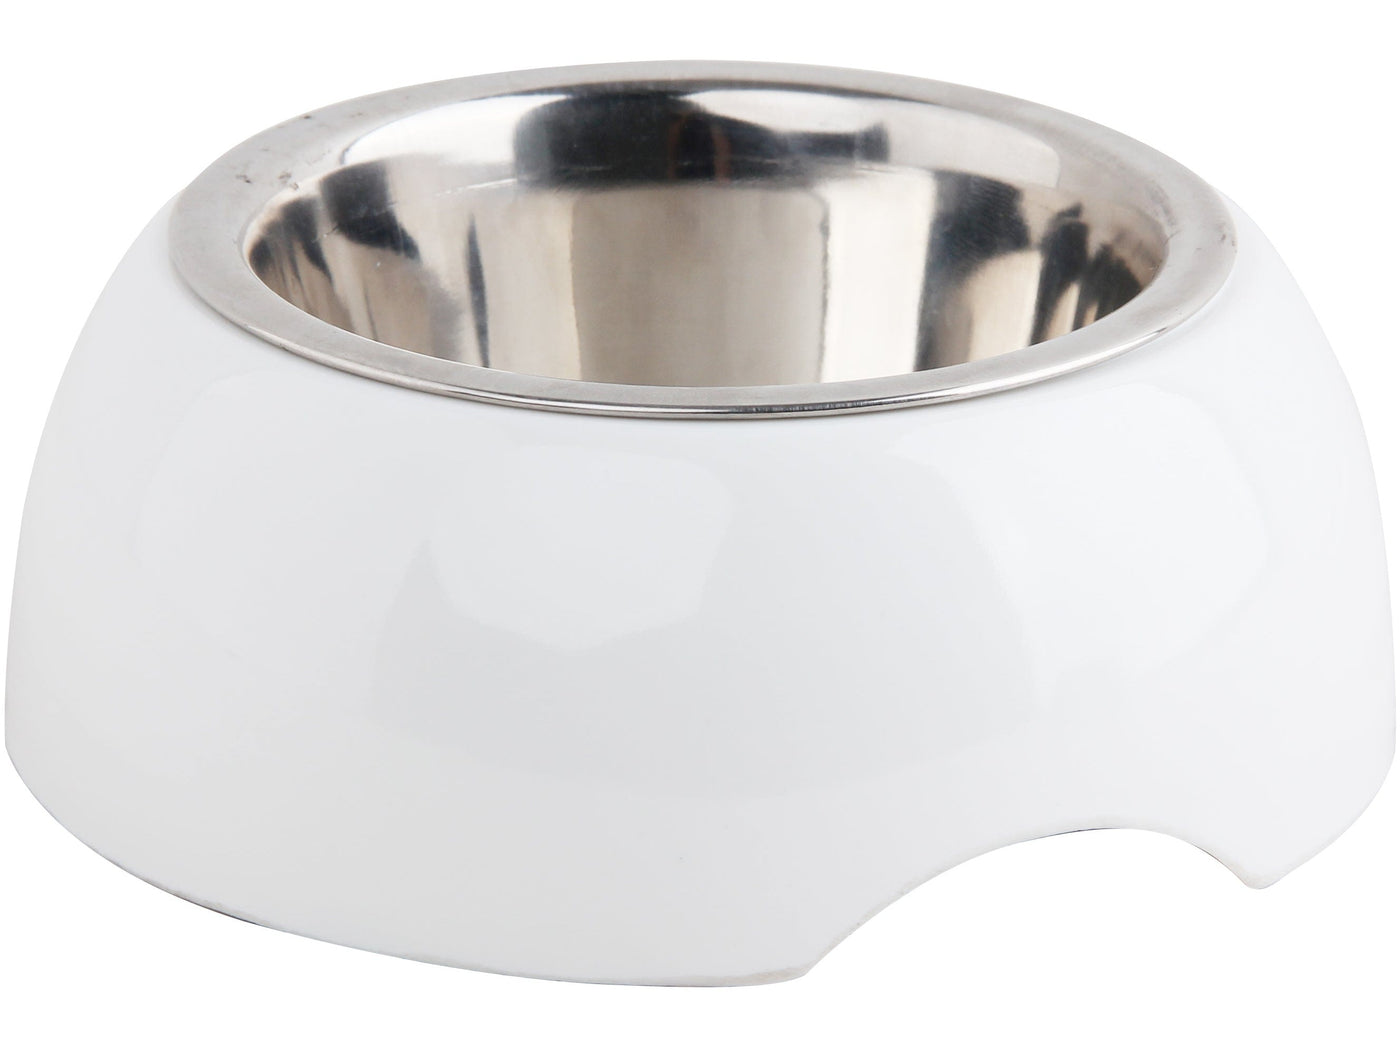 PAWISE Melamine bowl w/stainless steal insert